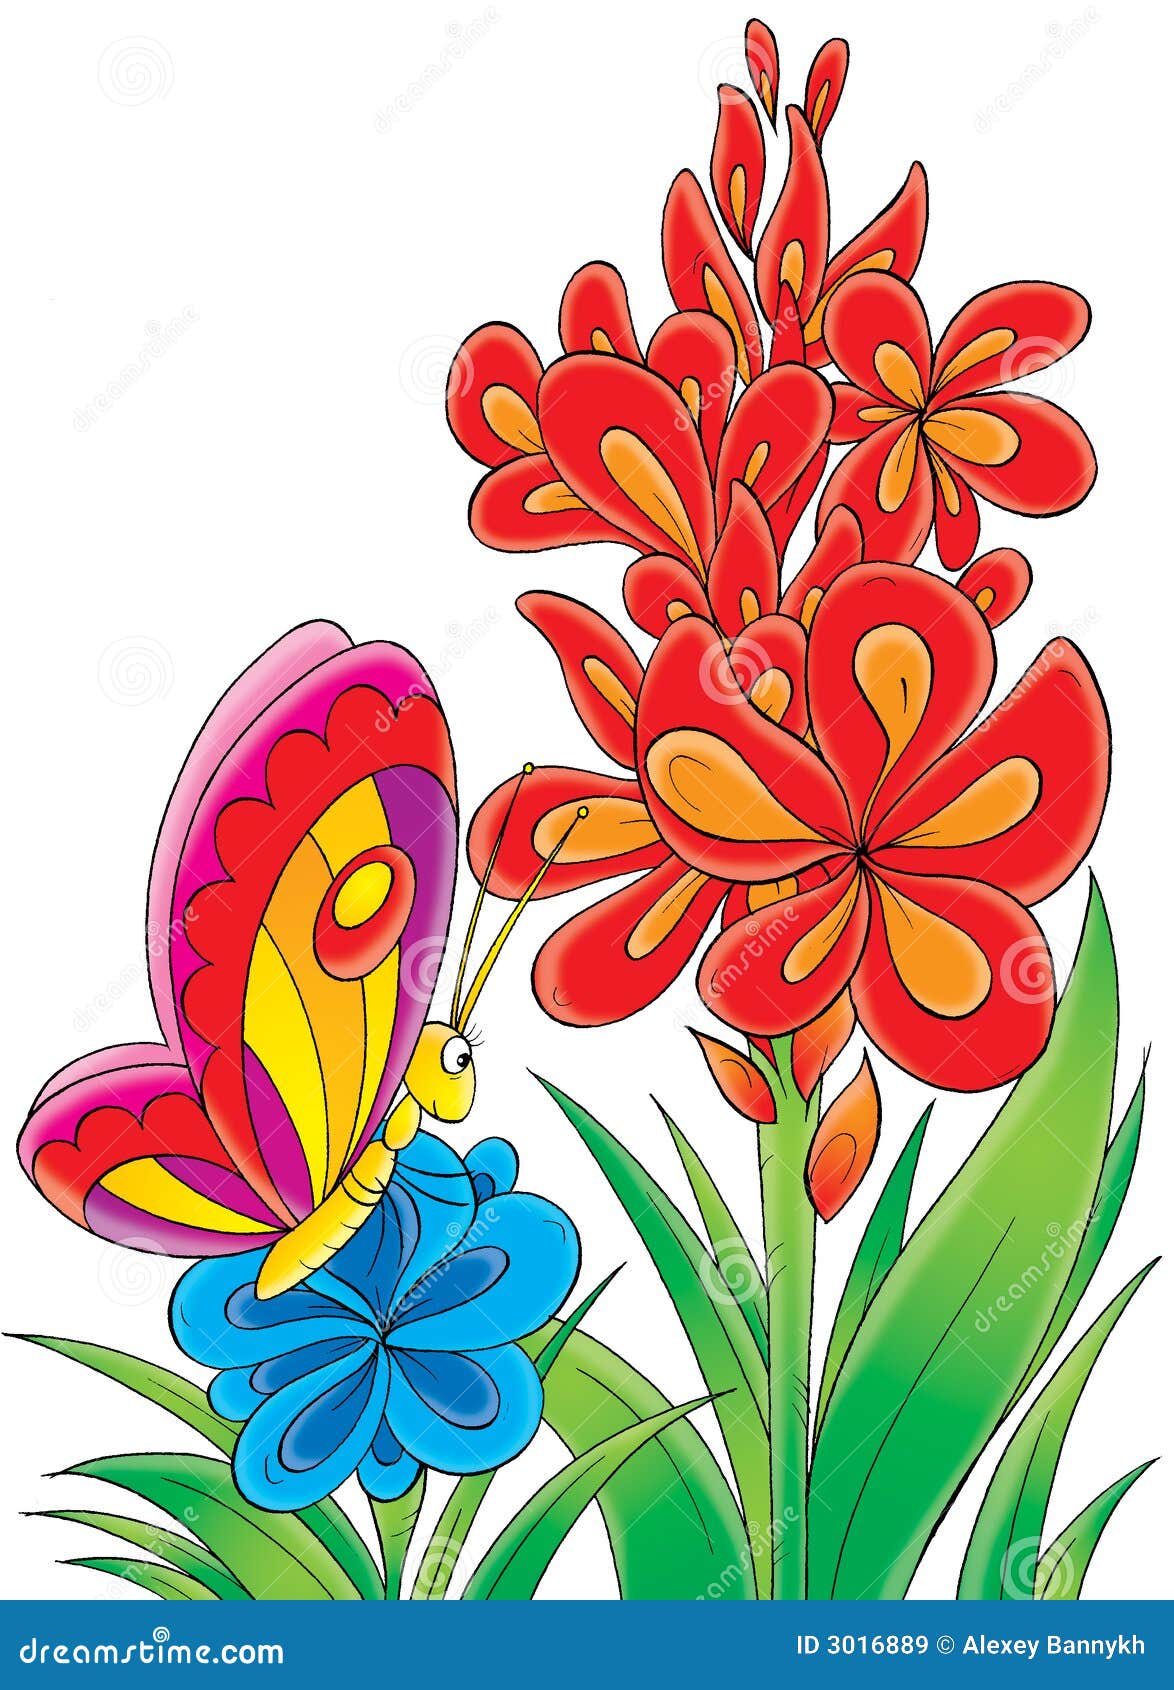 clip art flower and butterfly - photo #38